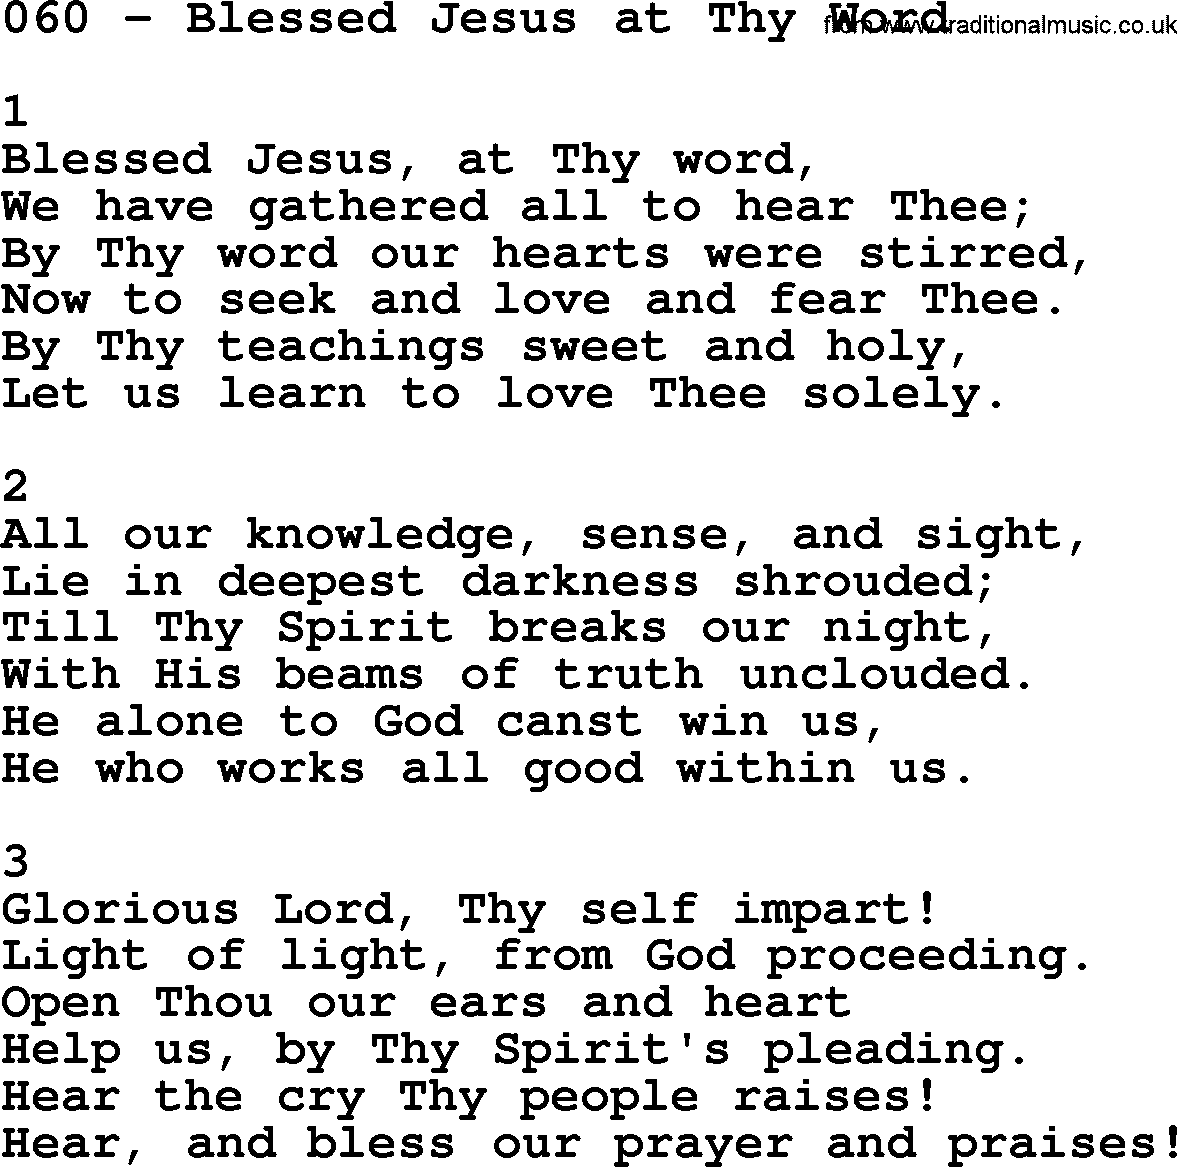 Complete Adventis Hymnal, title: 060-Blessed Jesus At Thy Word, with lyrics, midi, mp3, powerpoints(PPT) and PDF,